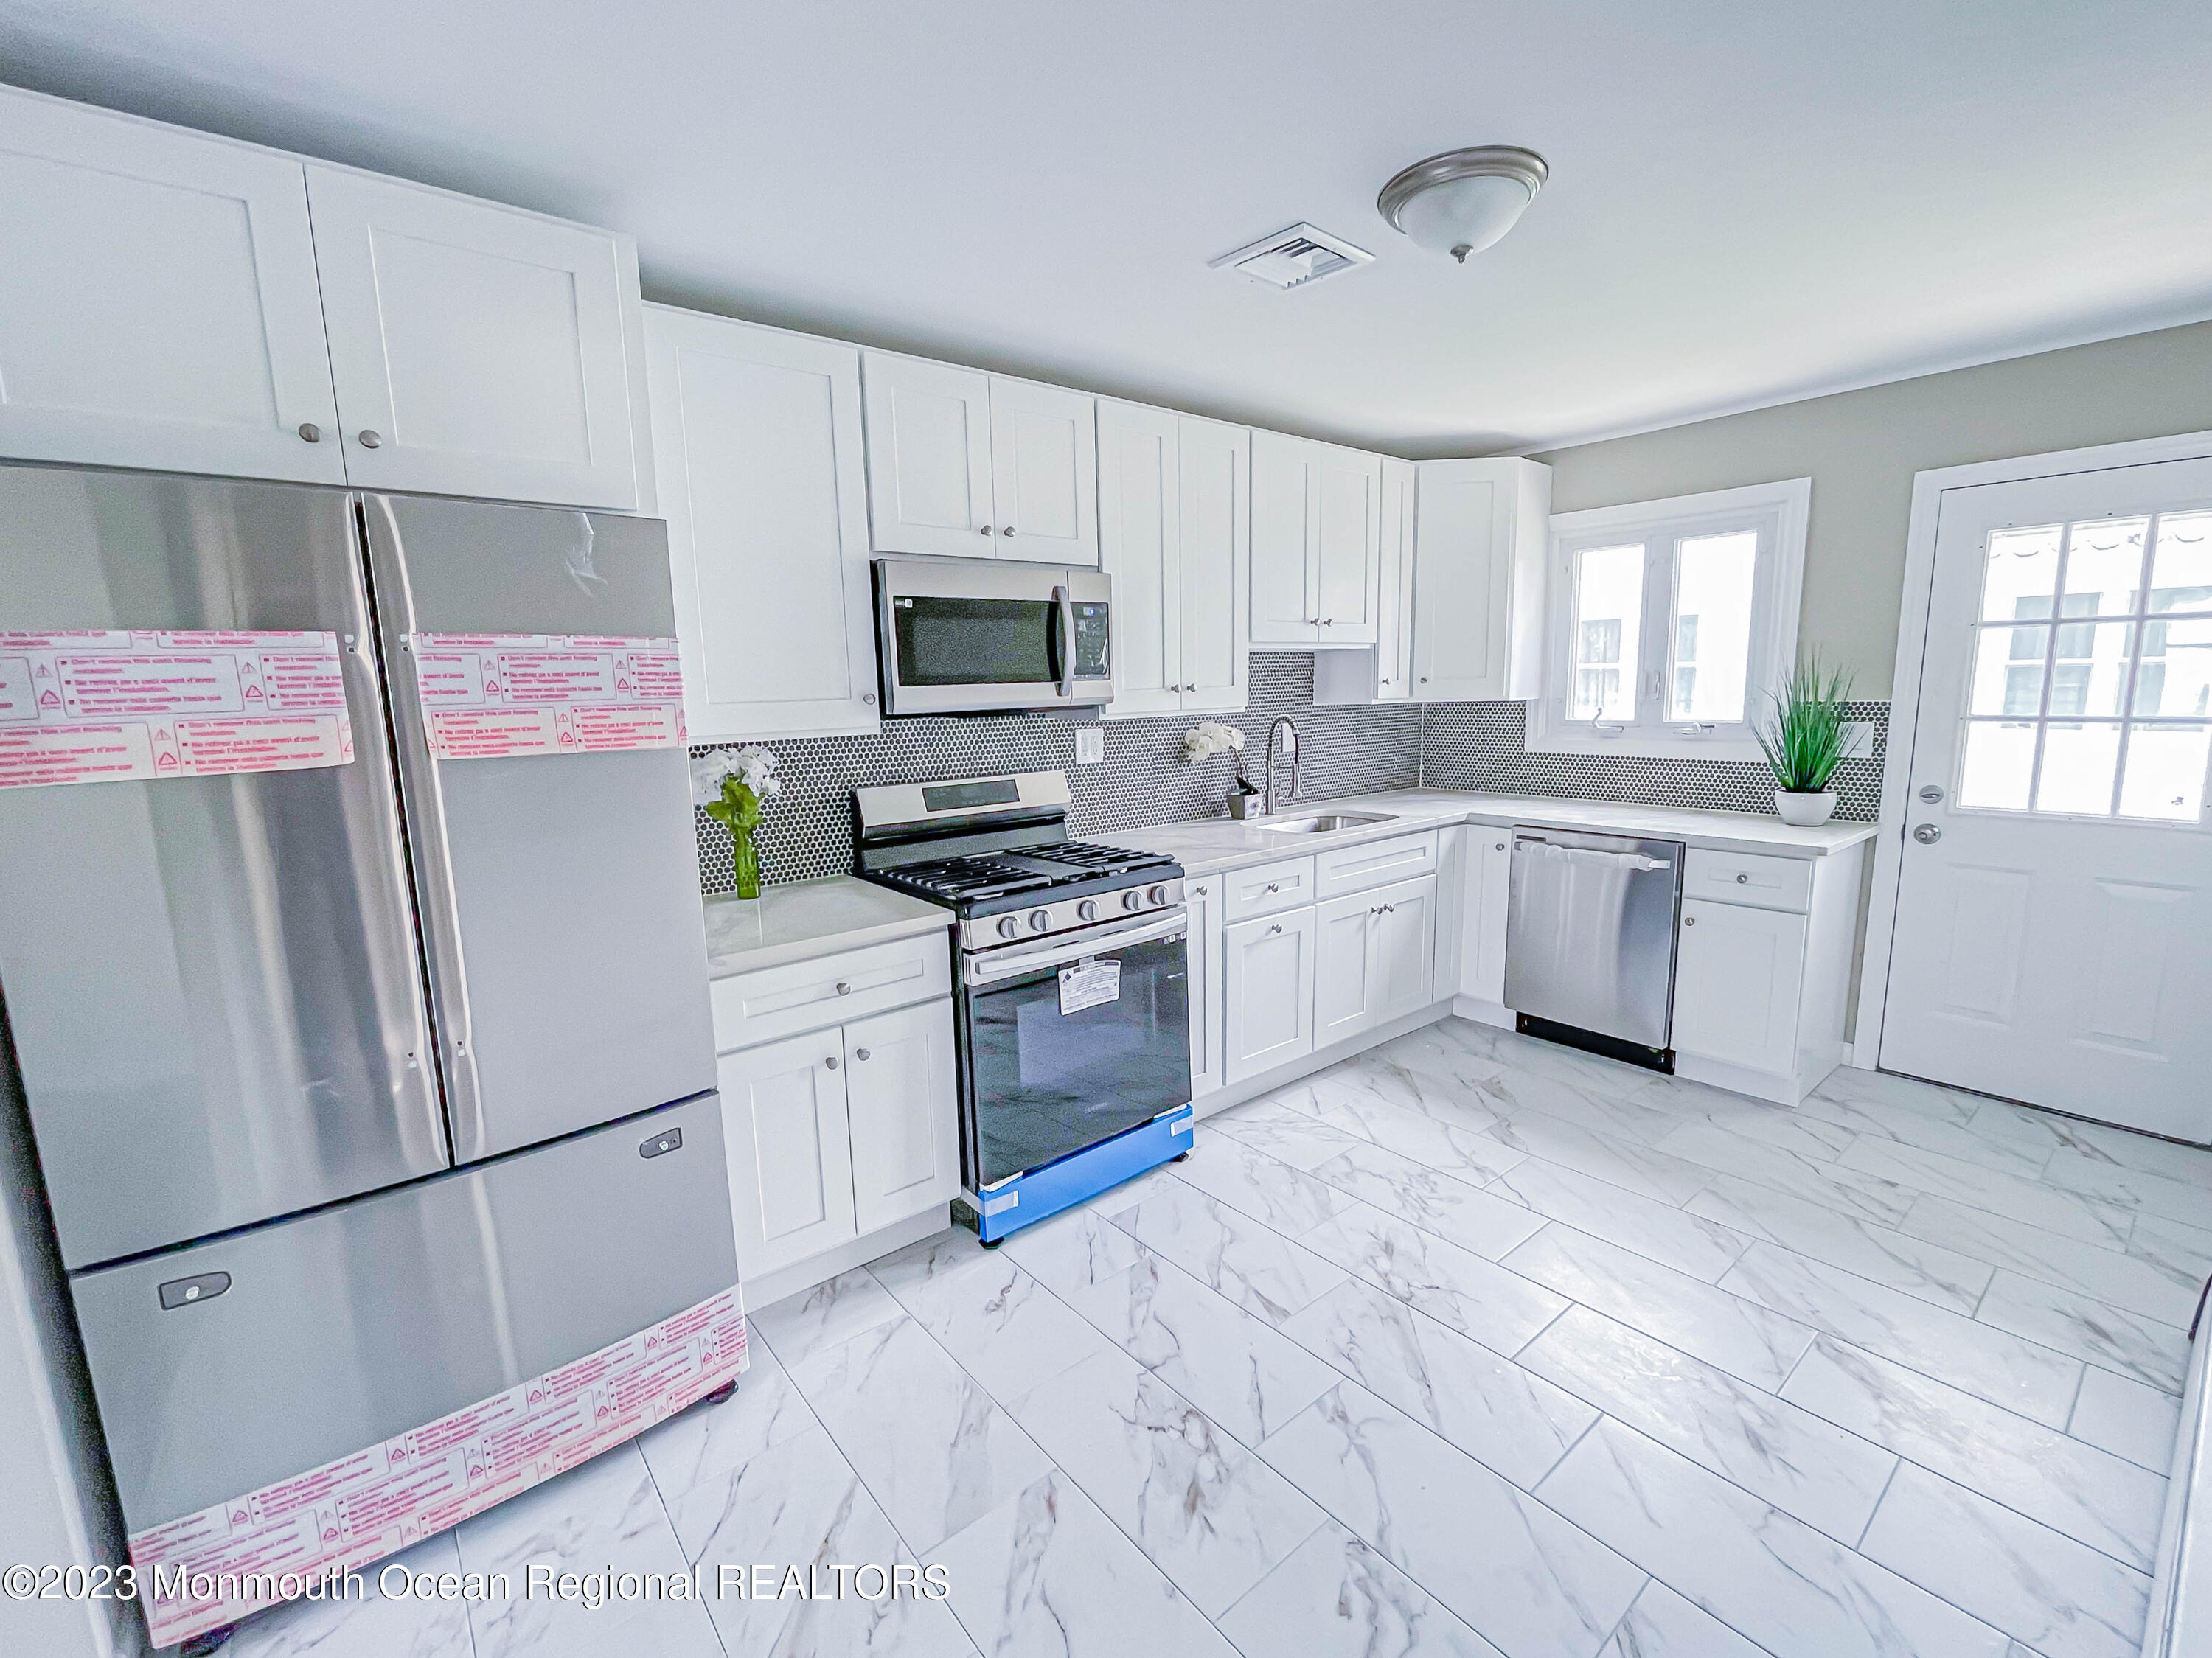 a kitchen with white cabinets stainless steel appliances and window